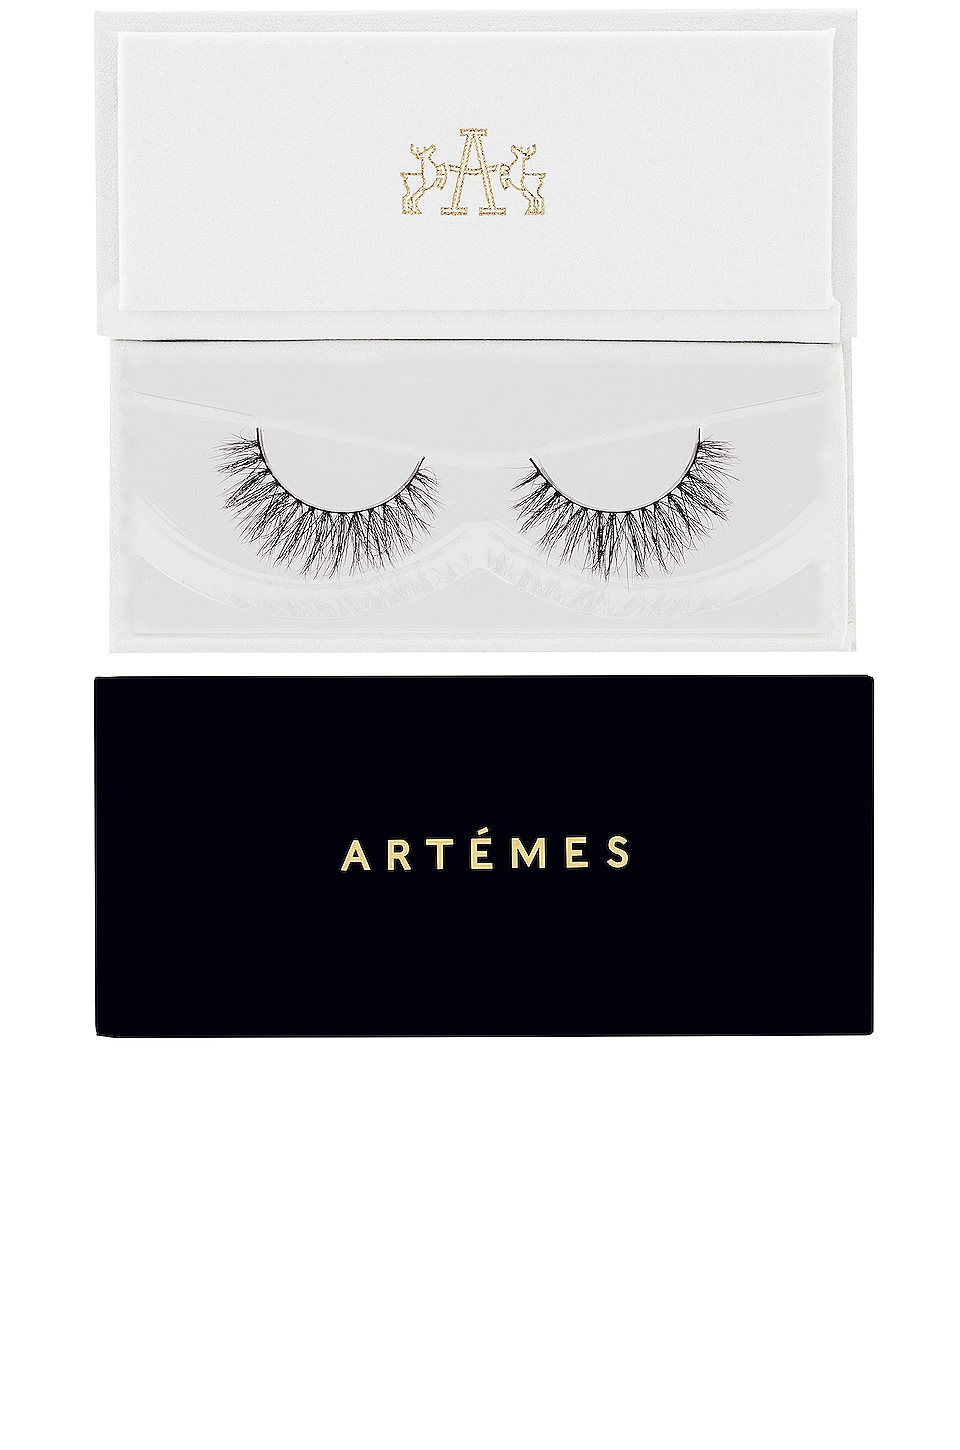 Shop Artemes Lash Love And Light Premium Pony Lashes. In N,a